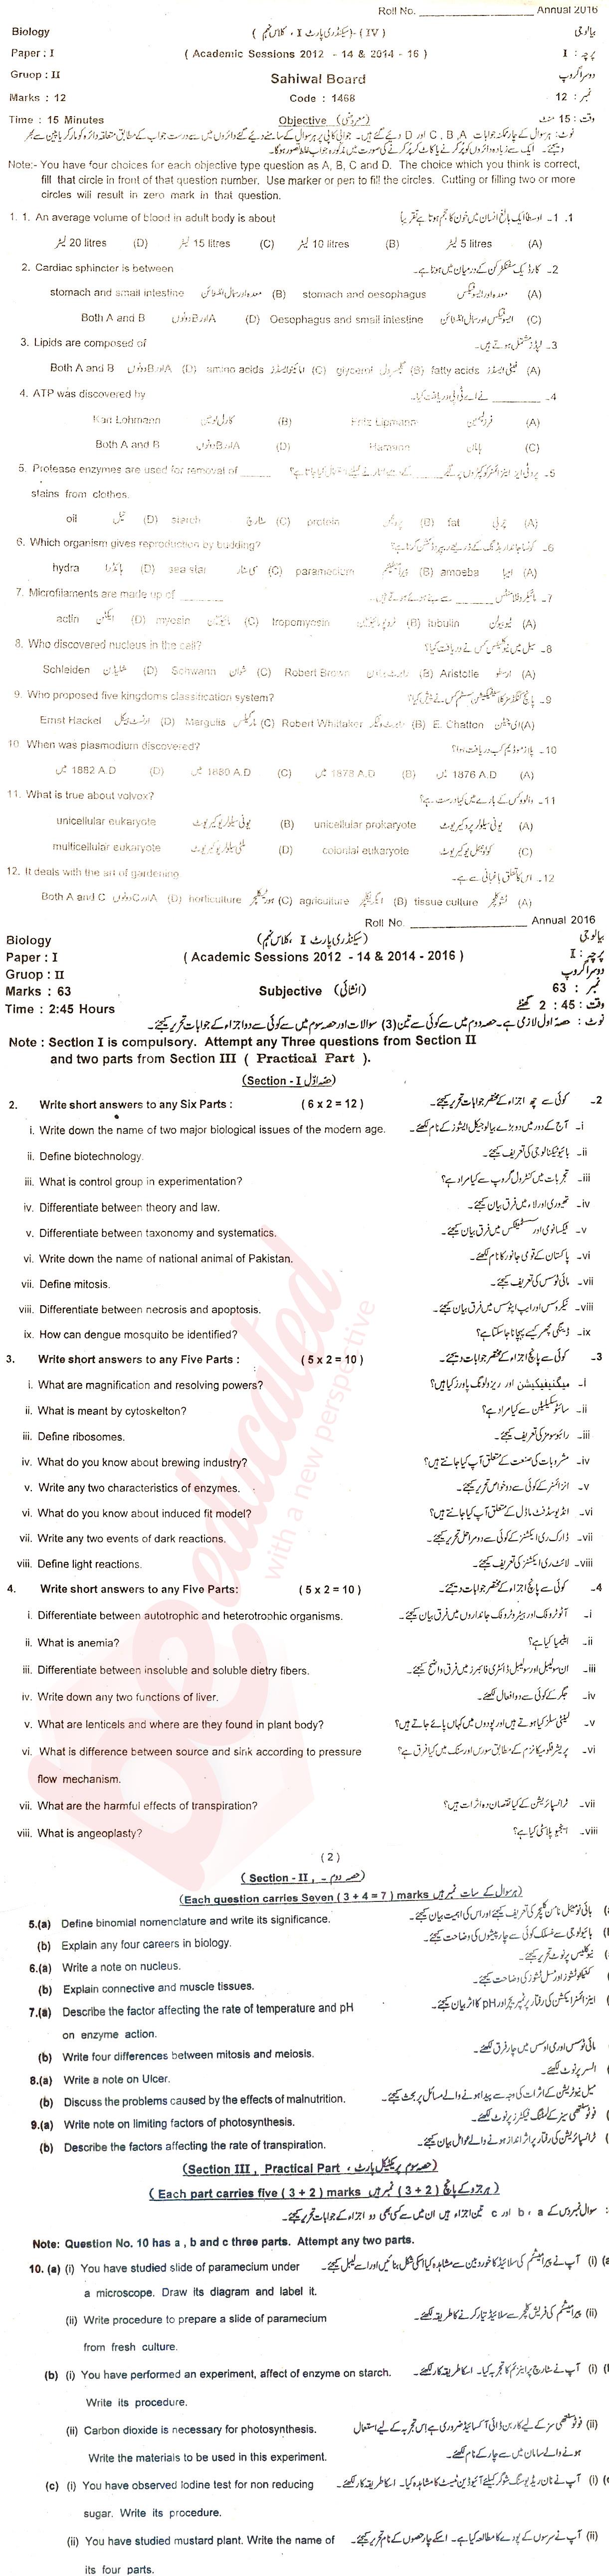 Biology 9th class Past Paper Group 2 BISE Sahiwal 2016